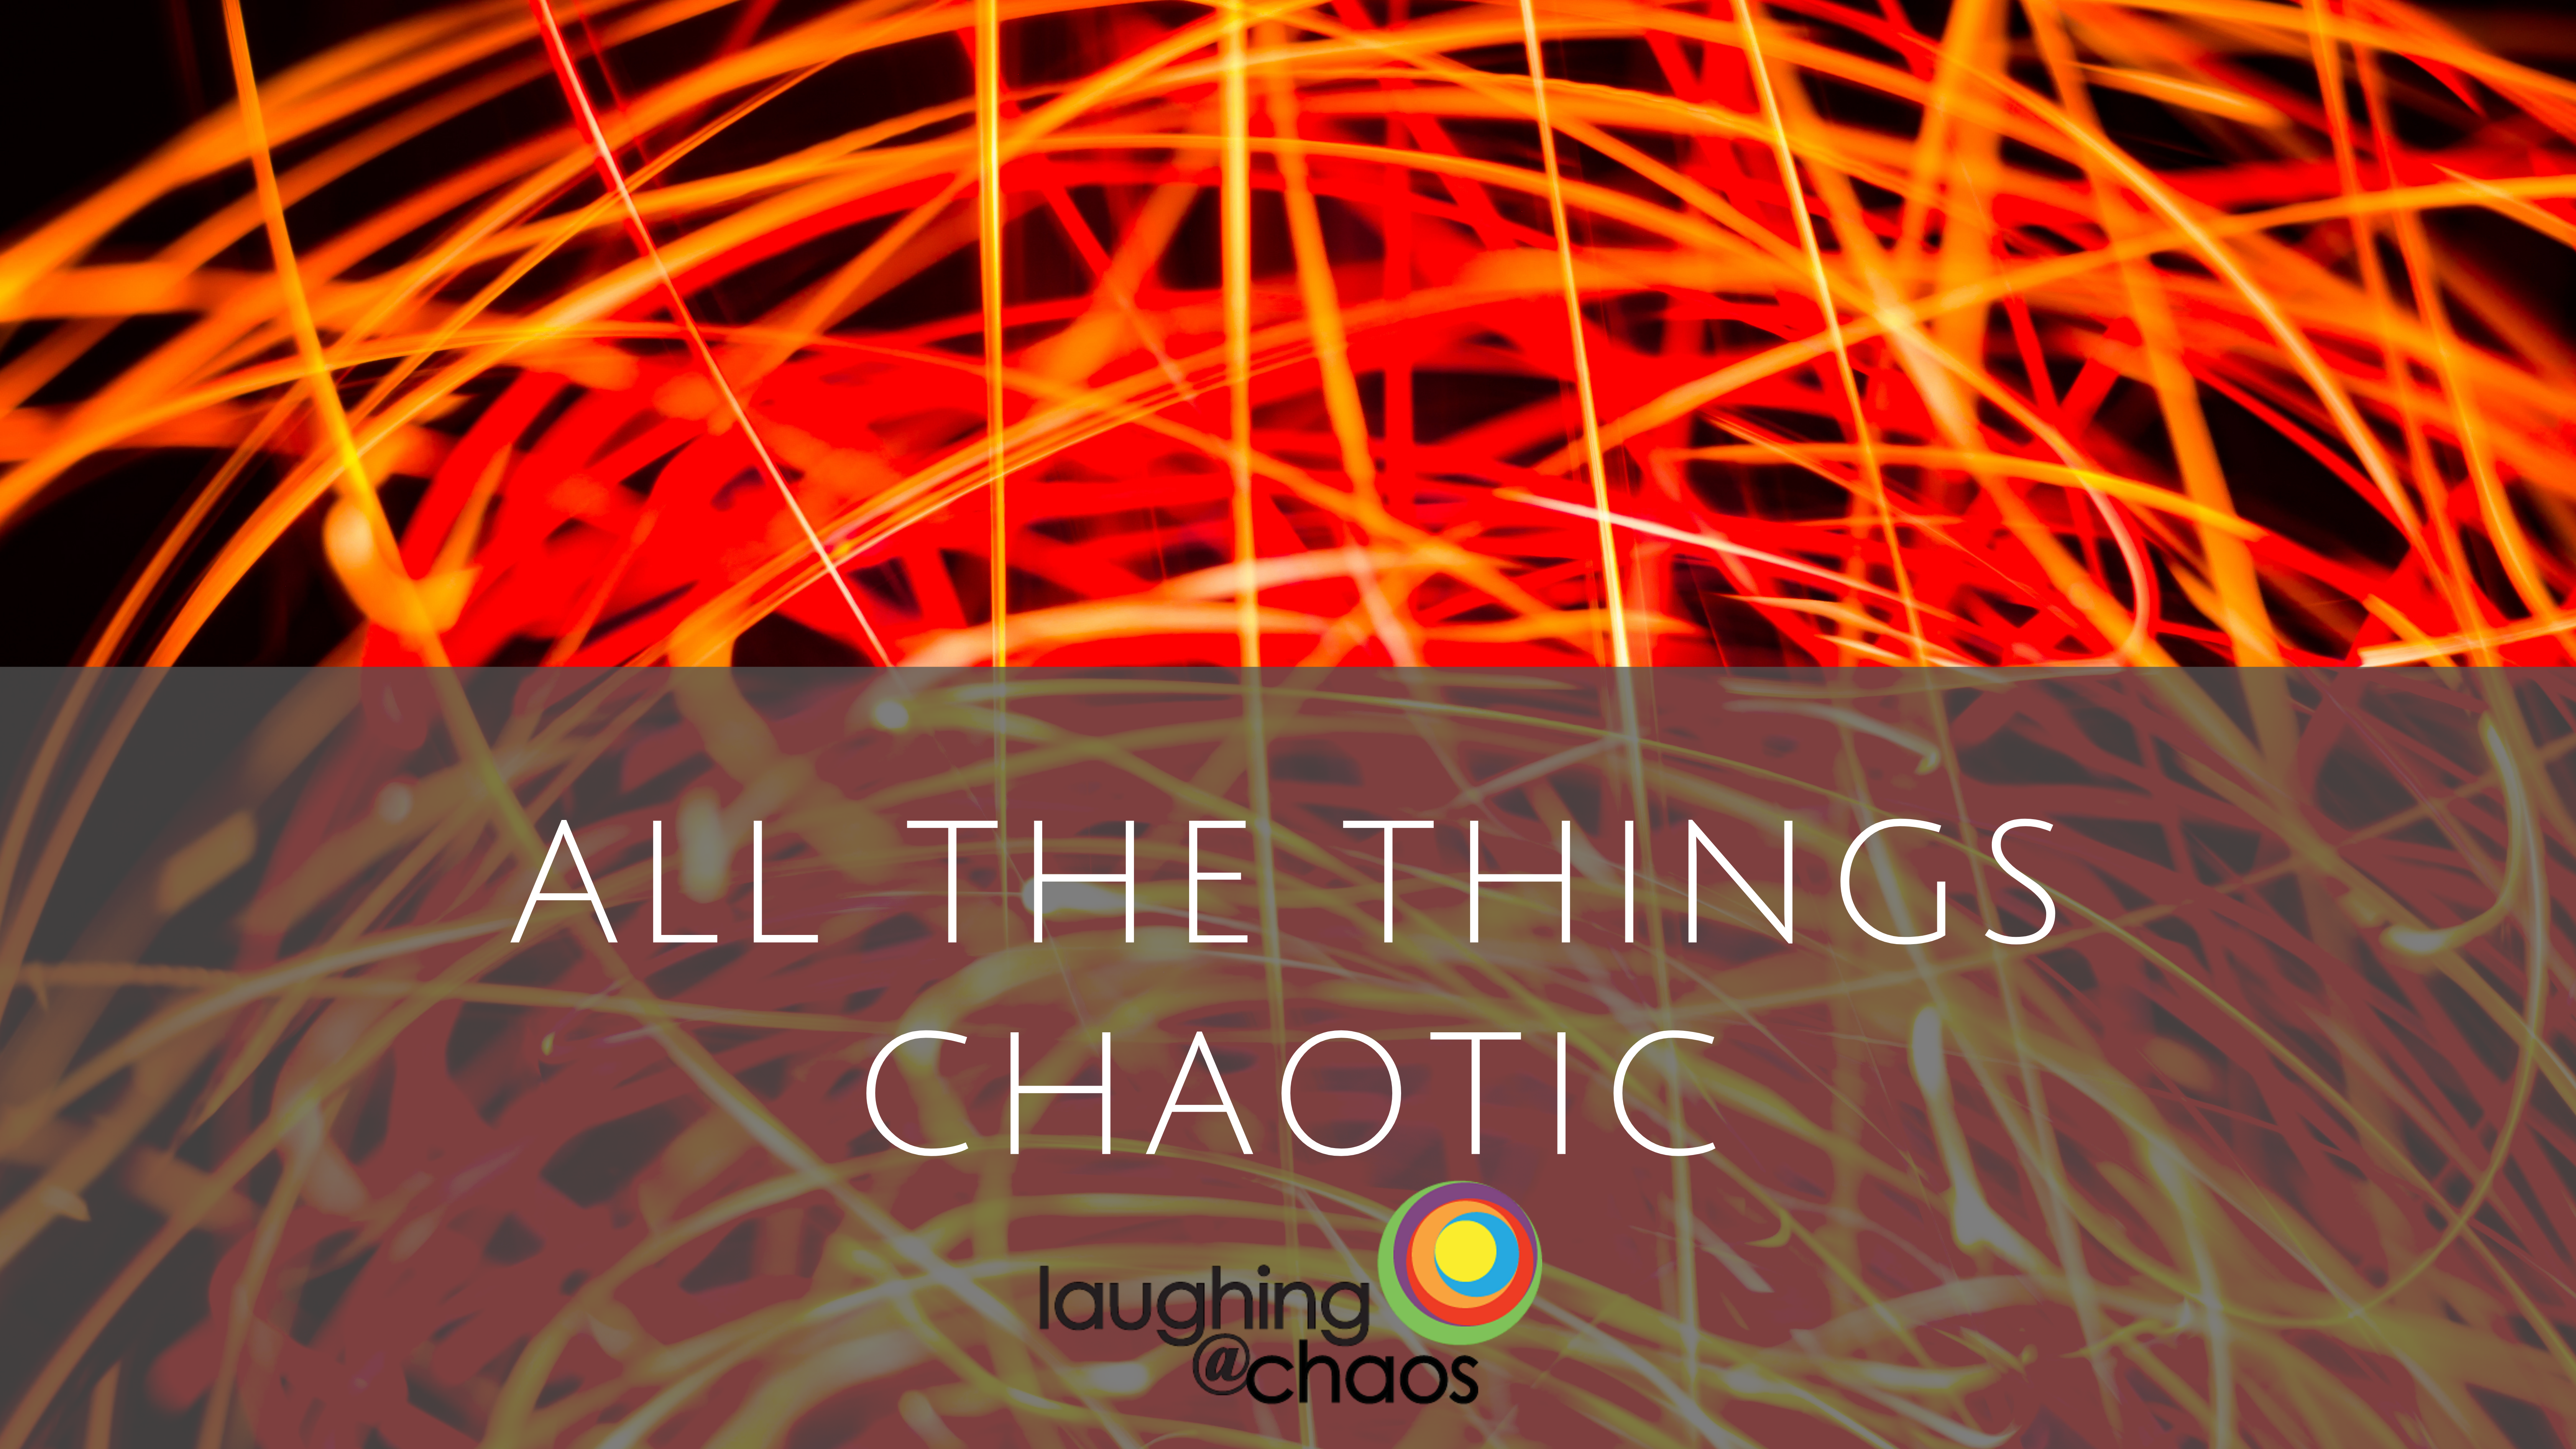 All the things chaotic